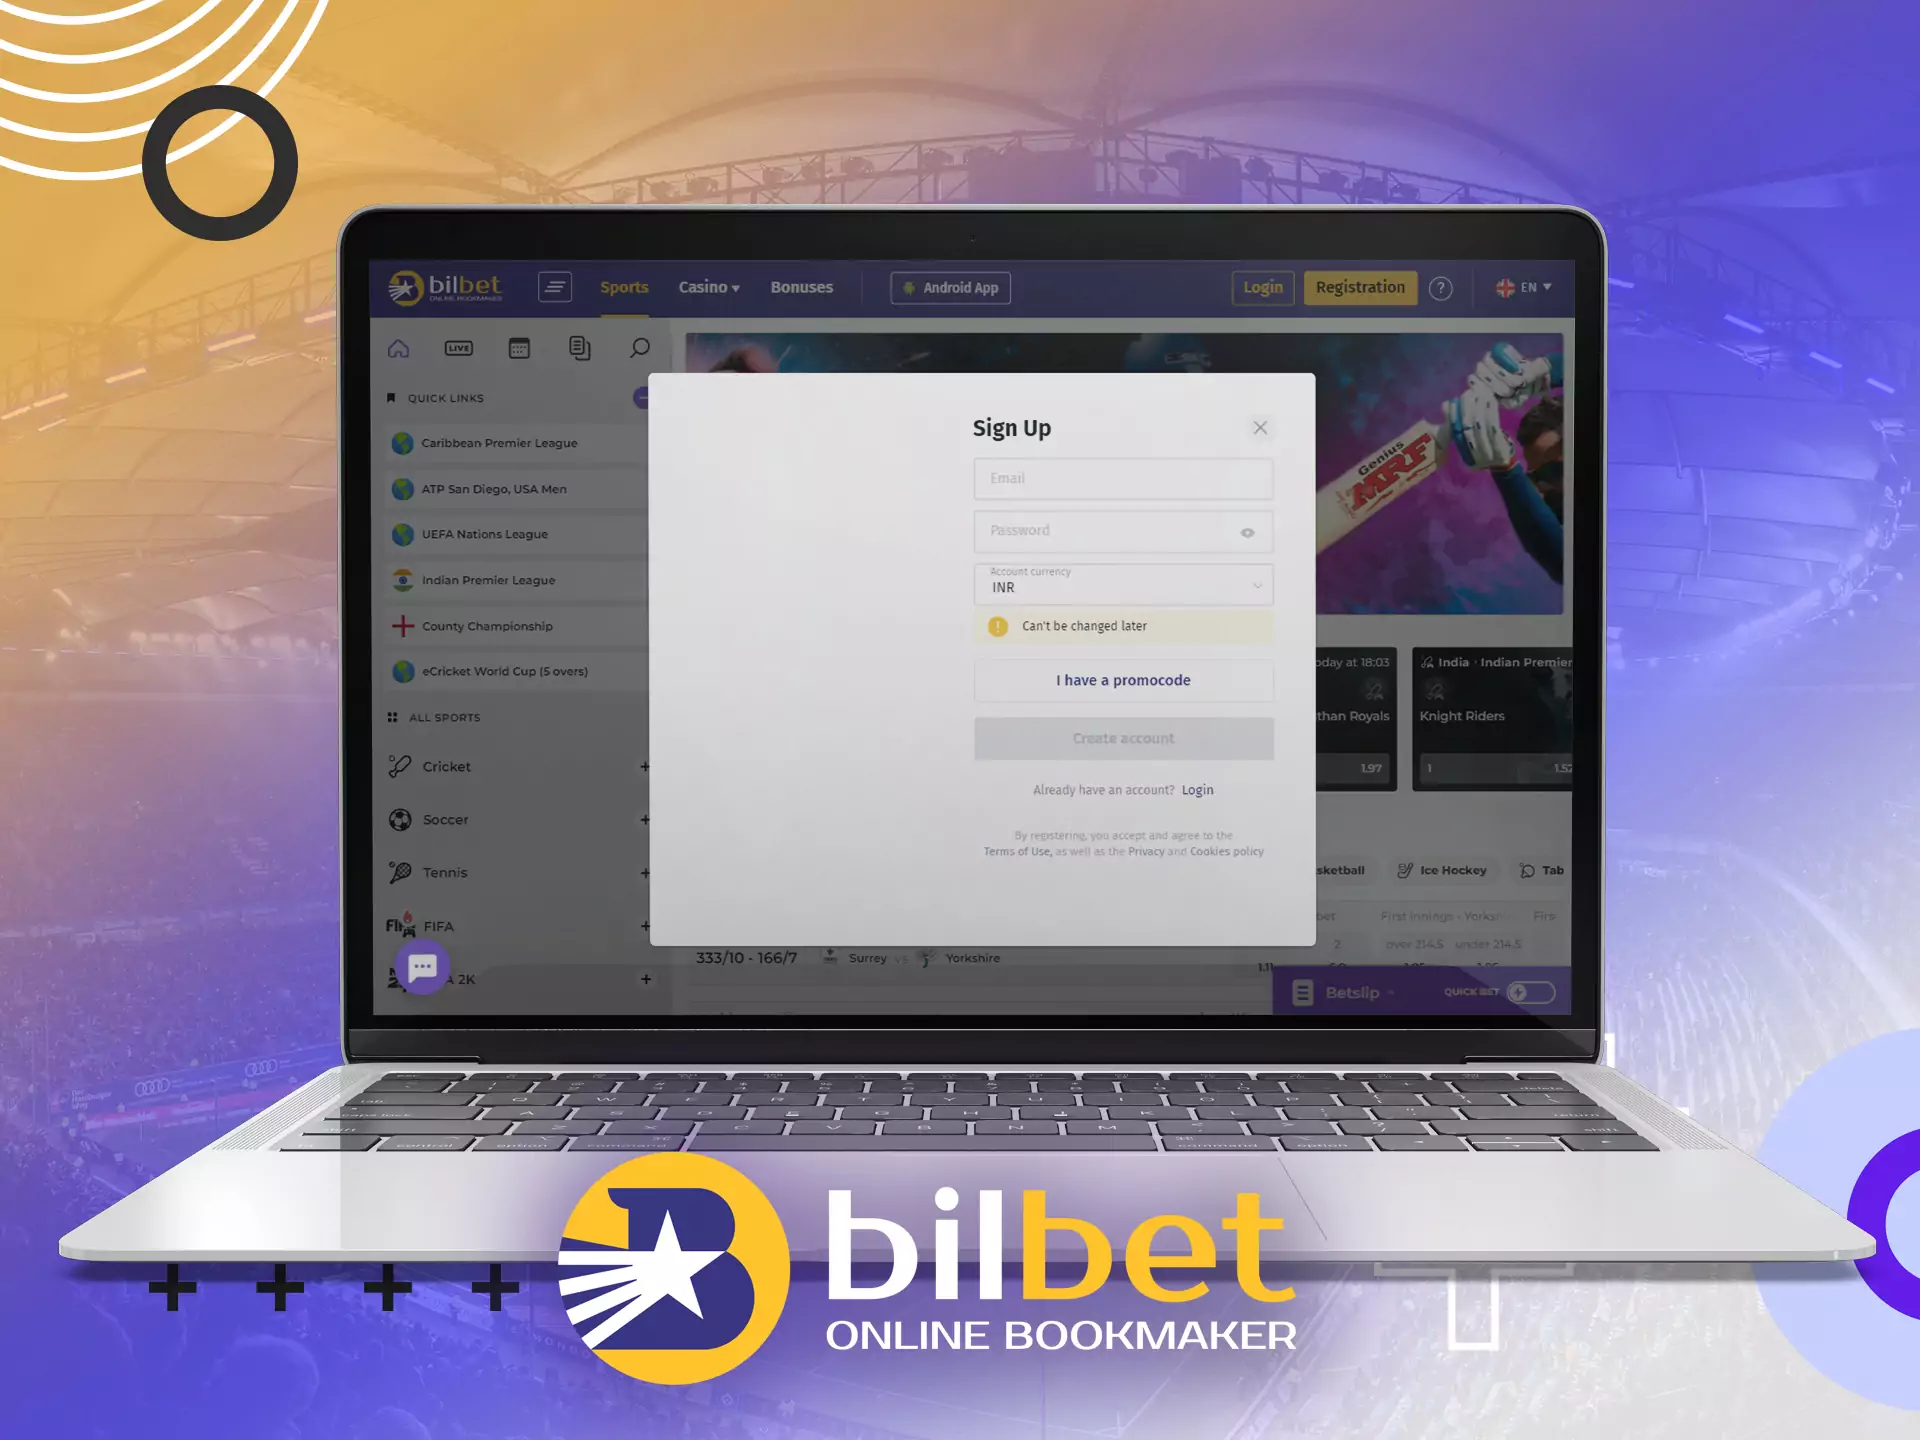 If you don't have a Bilbet account yet, register to start betting.